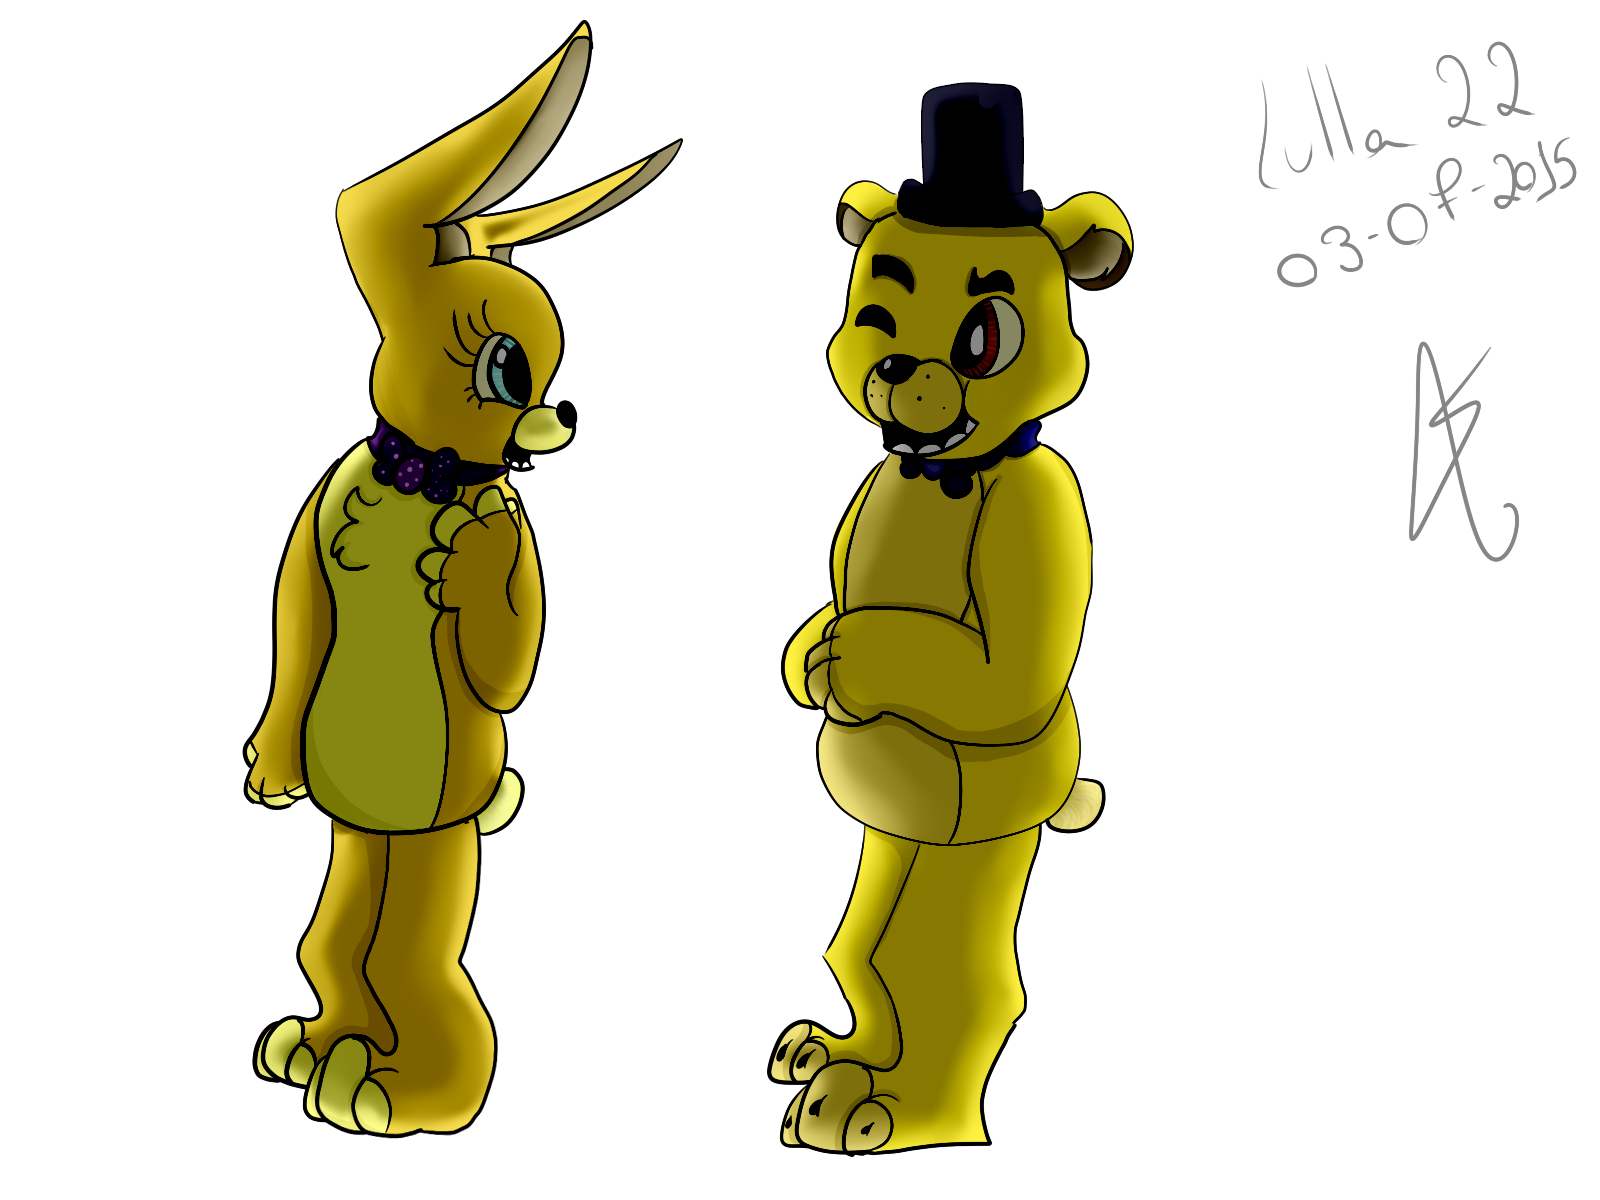 Fanart My Take On Golden Freddy And Springtrap In The Old Days